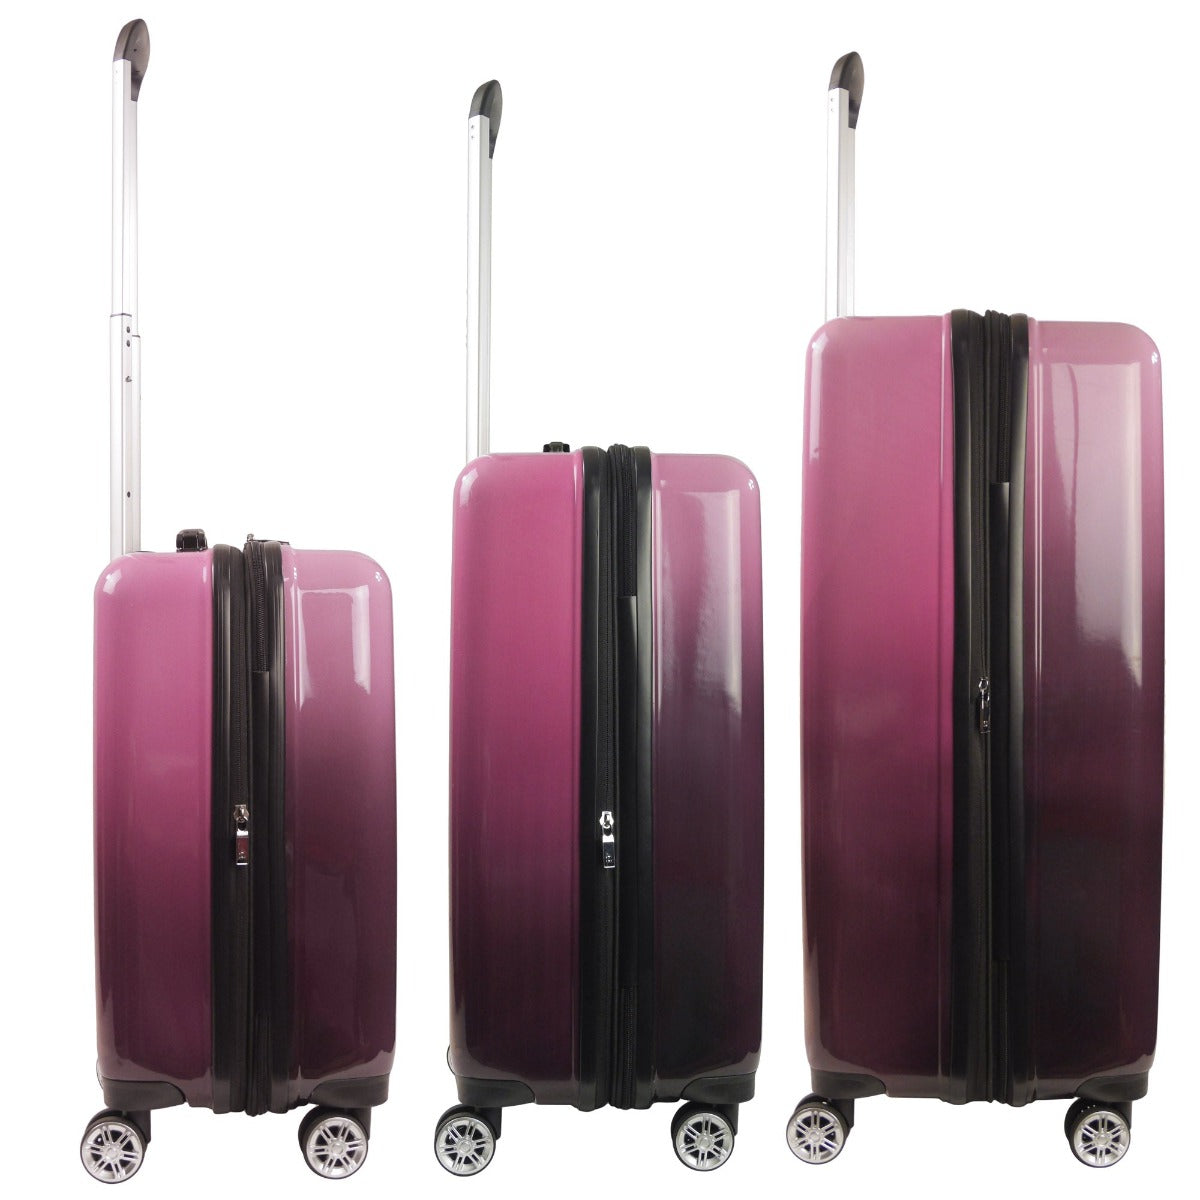 Ful Impulse Ombre Hardsided Spinner Suitcases Luggage 3 piece set pink purple fade